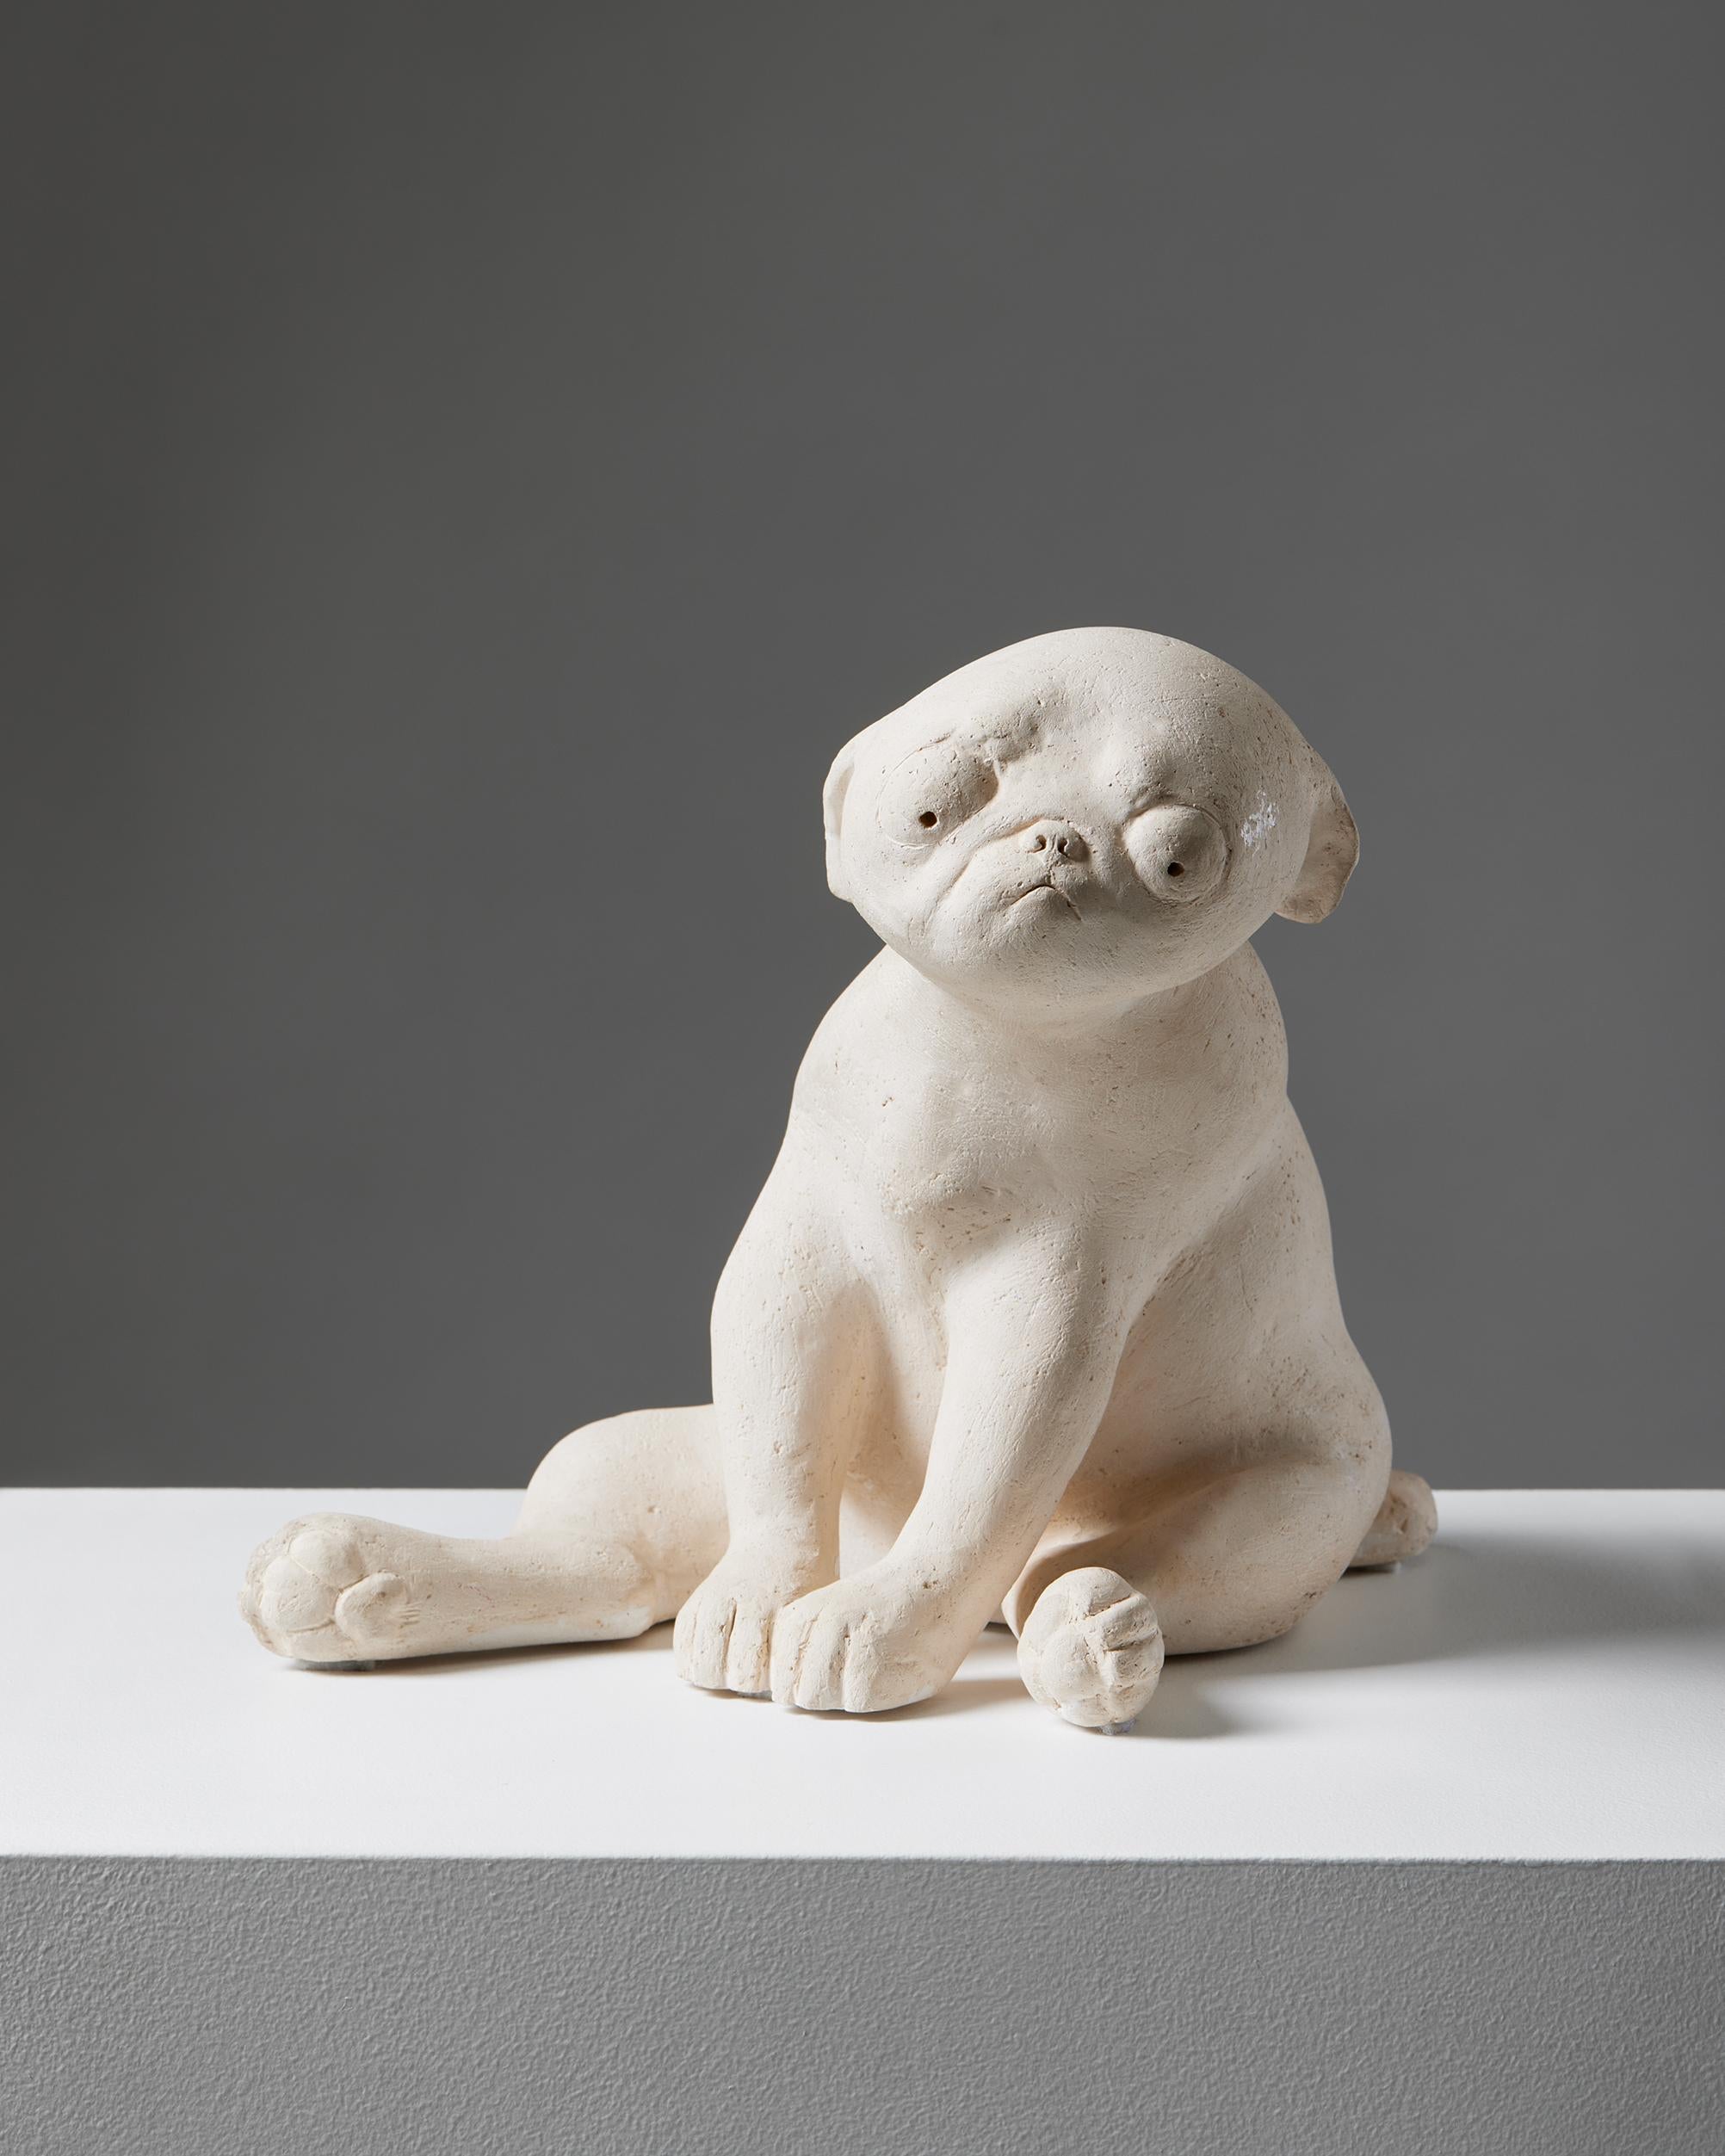 Sculpture ‘Puppy in the World’ by Sonja Pettersson,
Sweden, 1991.

Signed.

Stoneware.

Sonja Petterson was a Swedish sculptor. She studied at Konstfack—the Stockholm University of Arts, Crafts and Design. Her sculptures typically depict animals